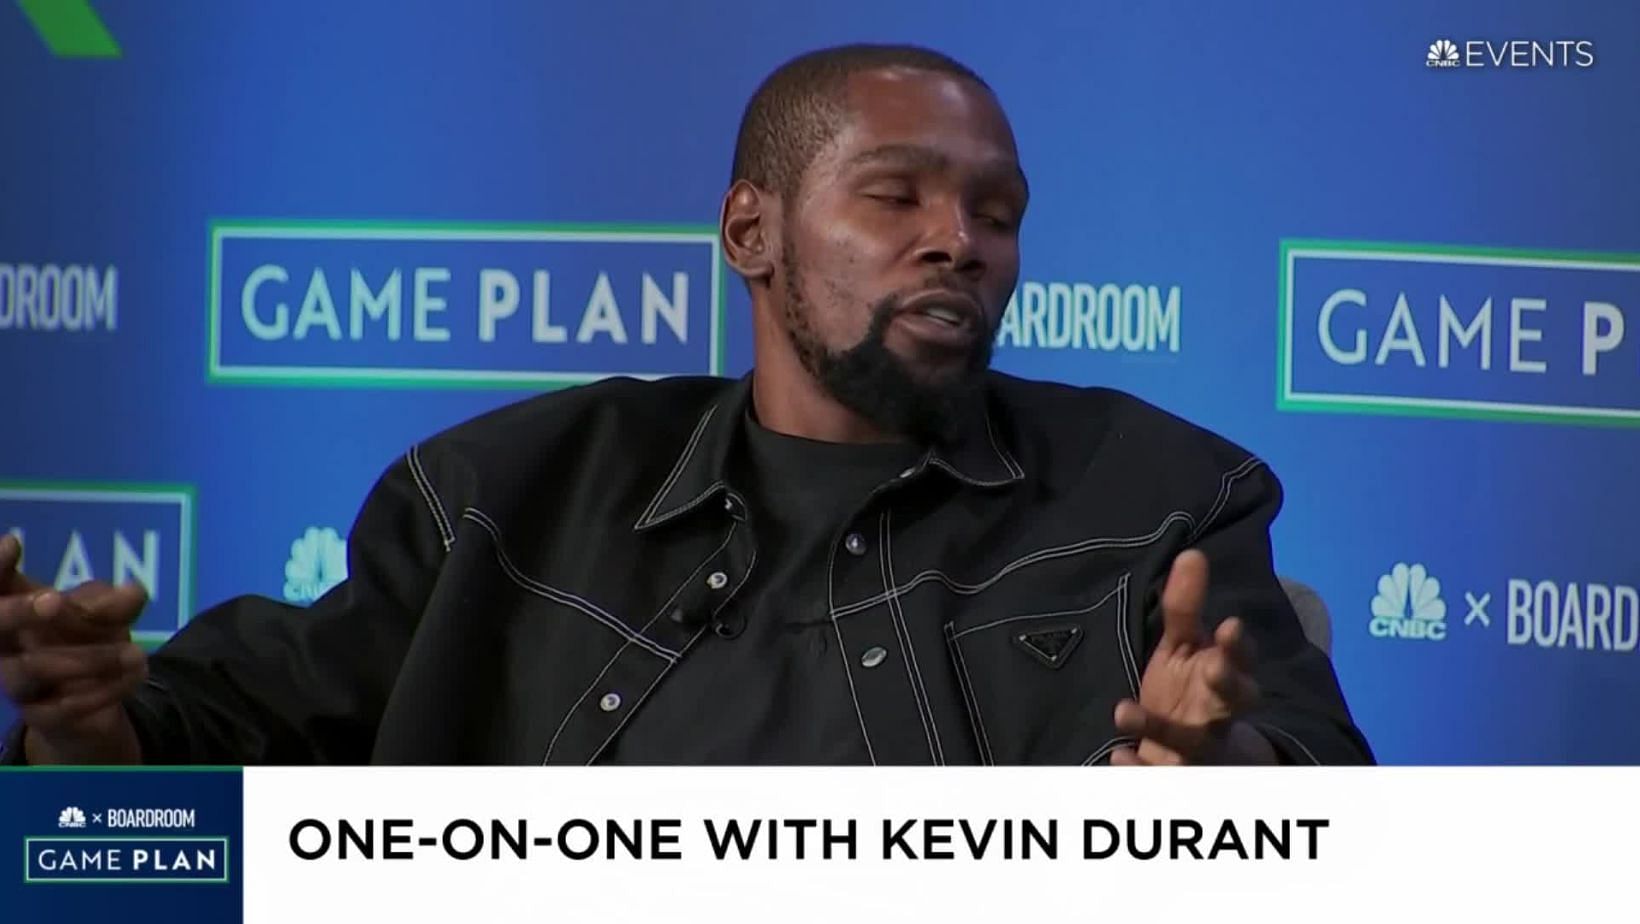 Kevin Durant opens up about his love for marijuana in an interview.